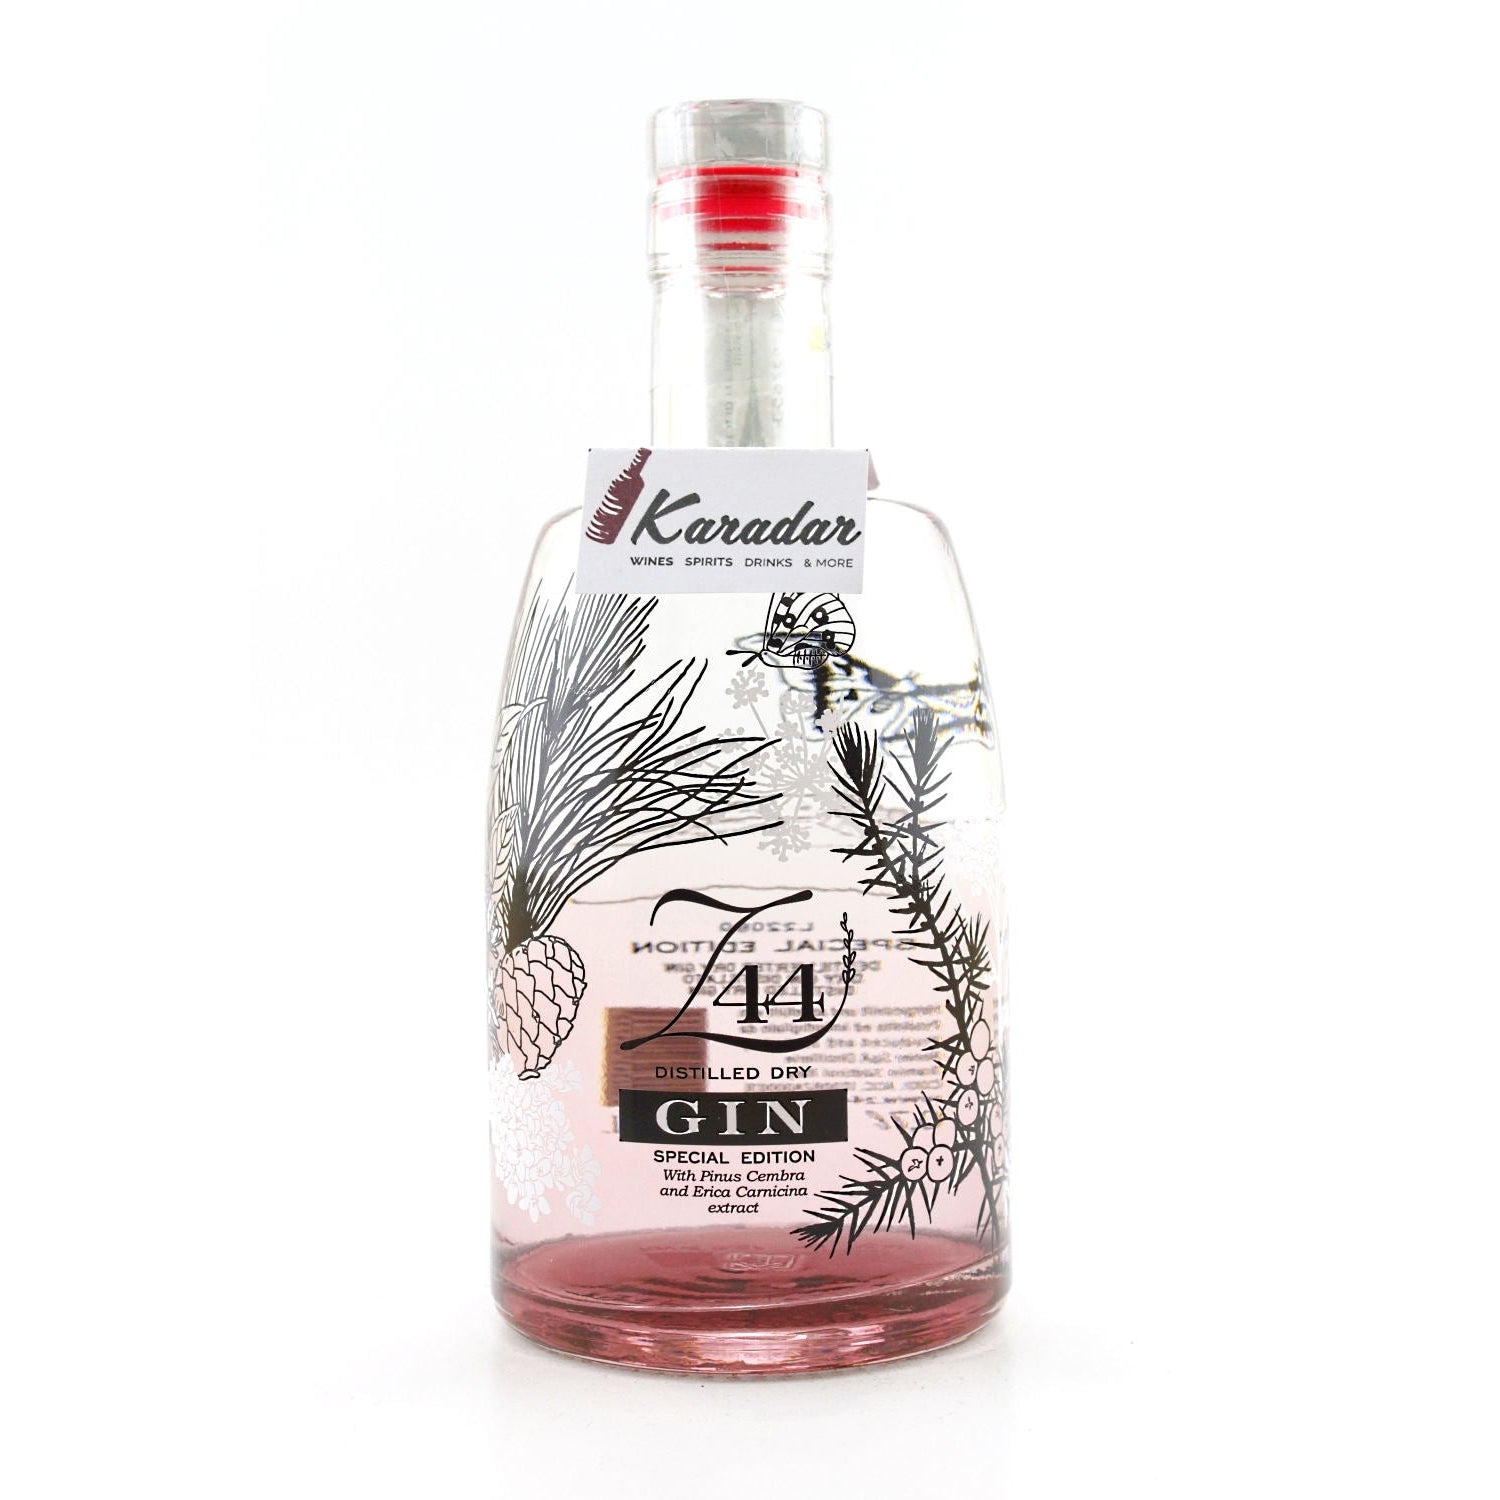 Gin 45,5% 0,7l Z44 Vol. Distilled Dry Special Edition